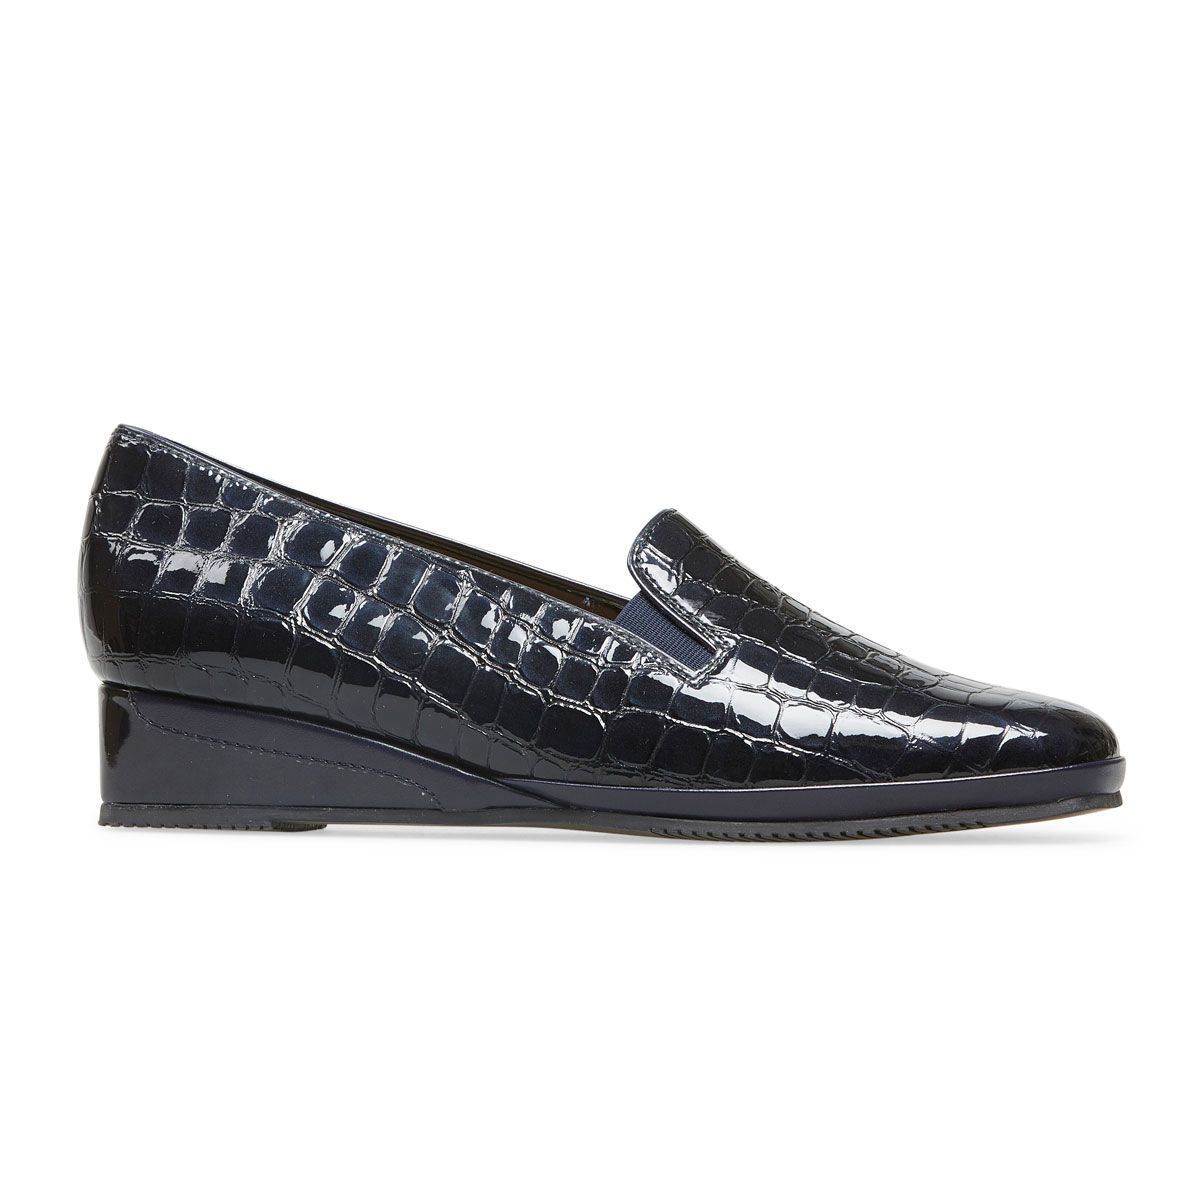 Van Dal Shoes - Rochester II Wedges in Midnight Patent Croc